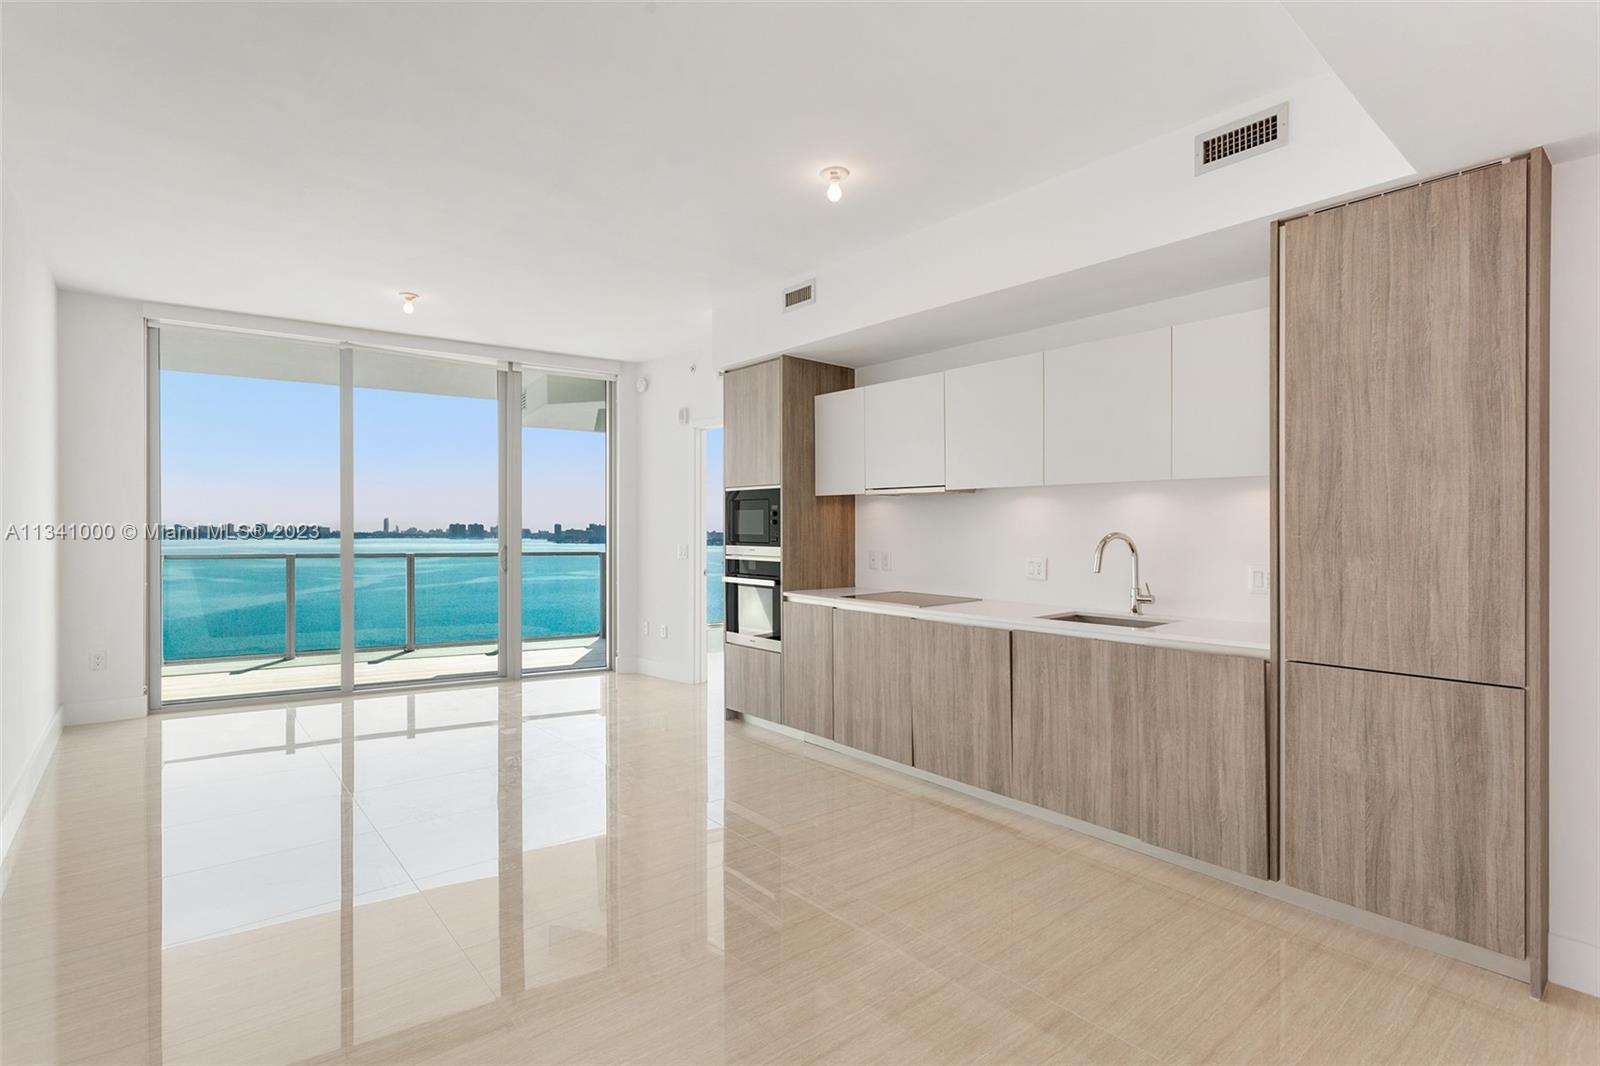 Beautiful 2 bedroom 2 bath residence in Biscayne Beach Condo. Features high ceilings, floor-to-ceili